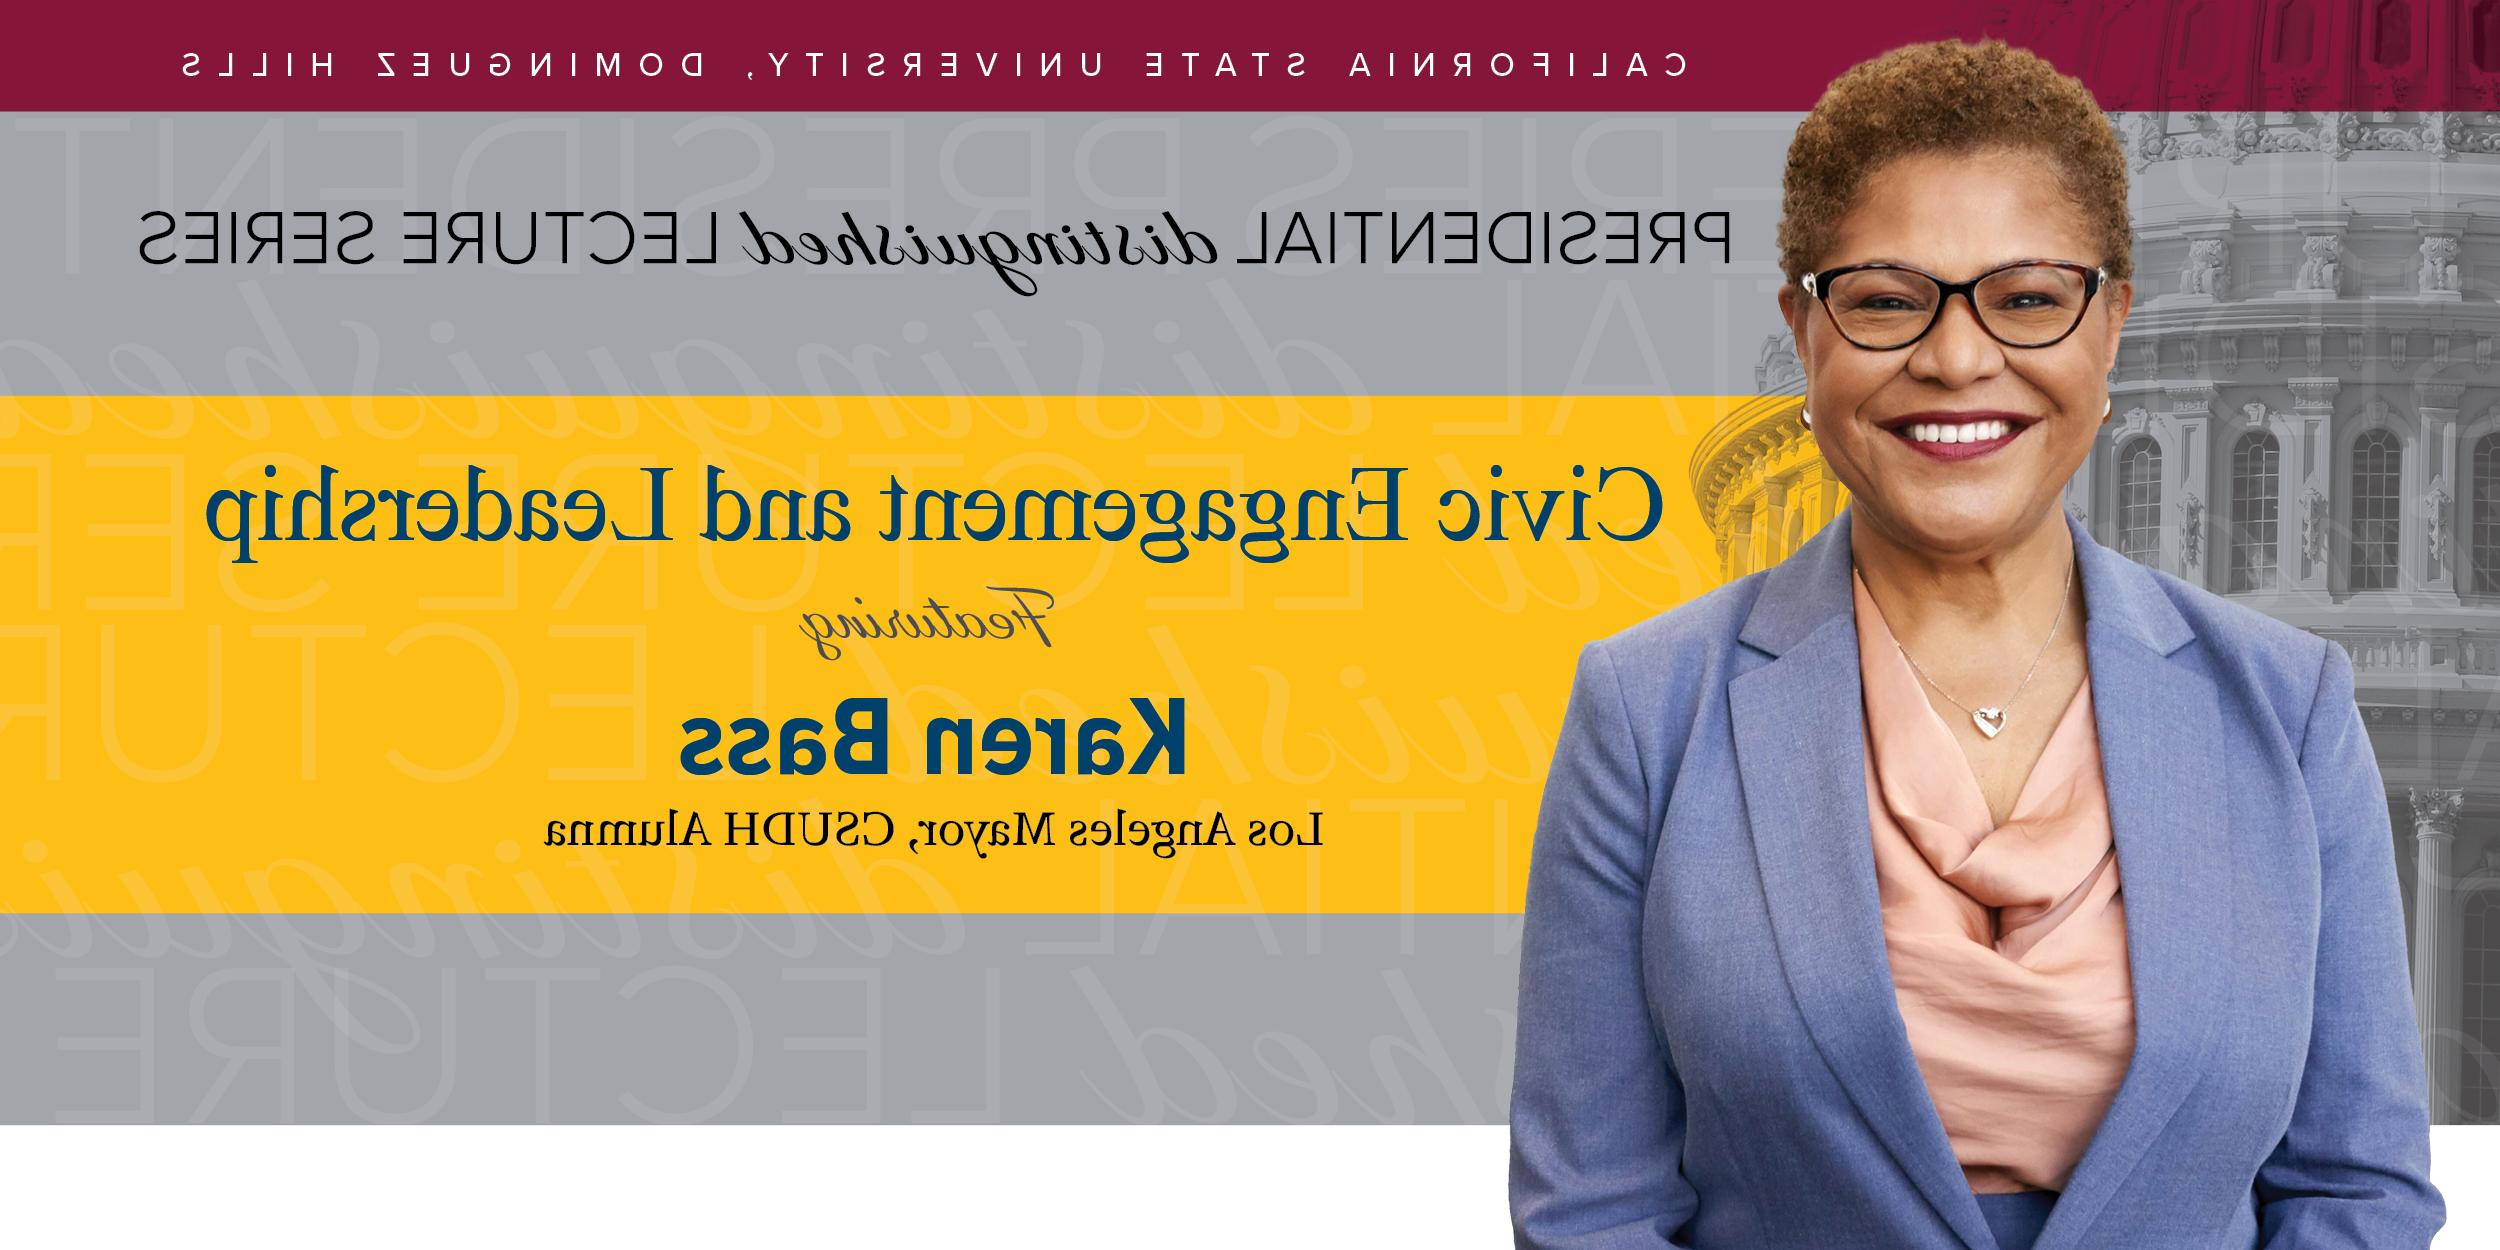 Presidential Distinguished Lecture Series: Civic Engagement and Leadership featuring Karen Bass, Los Angeles Mayor, CSUDH Alumna